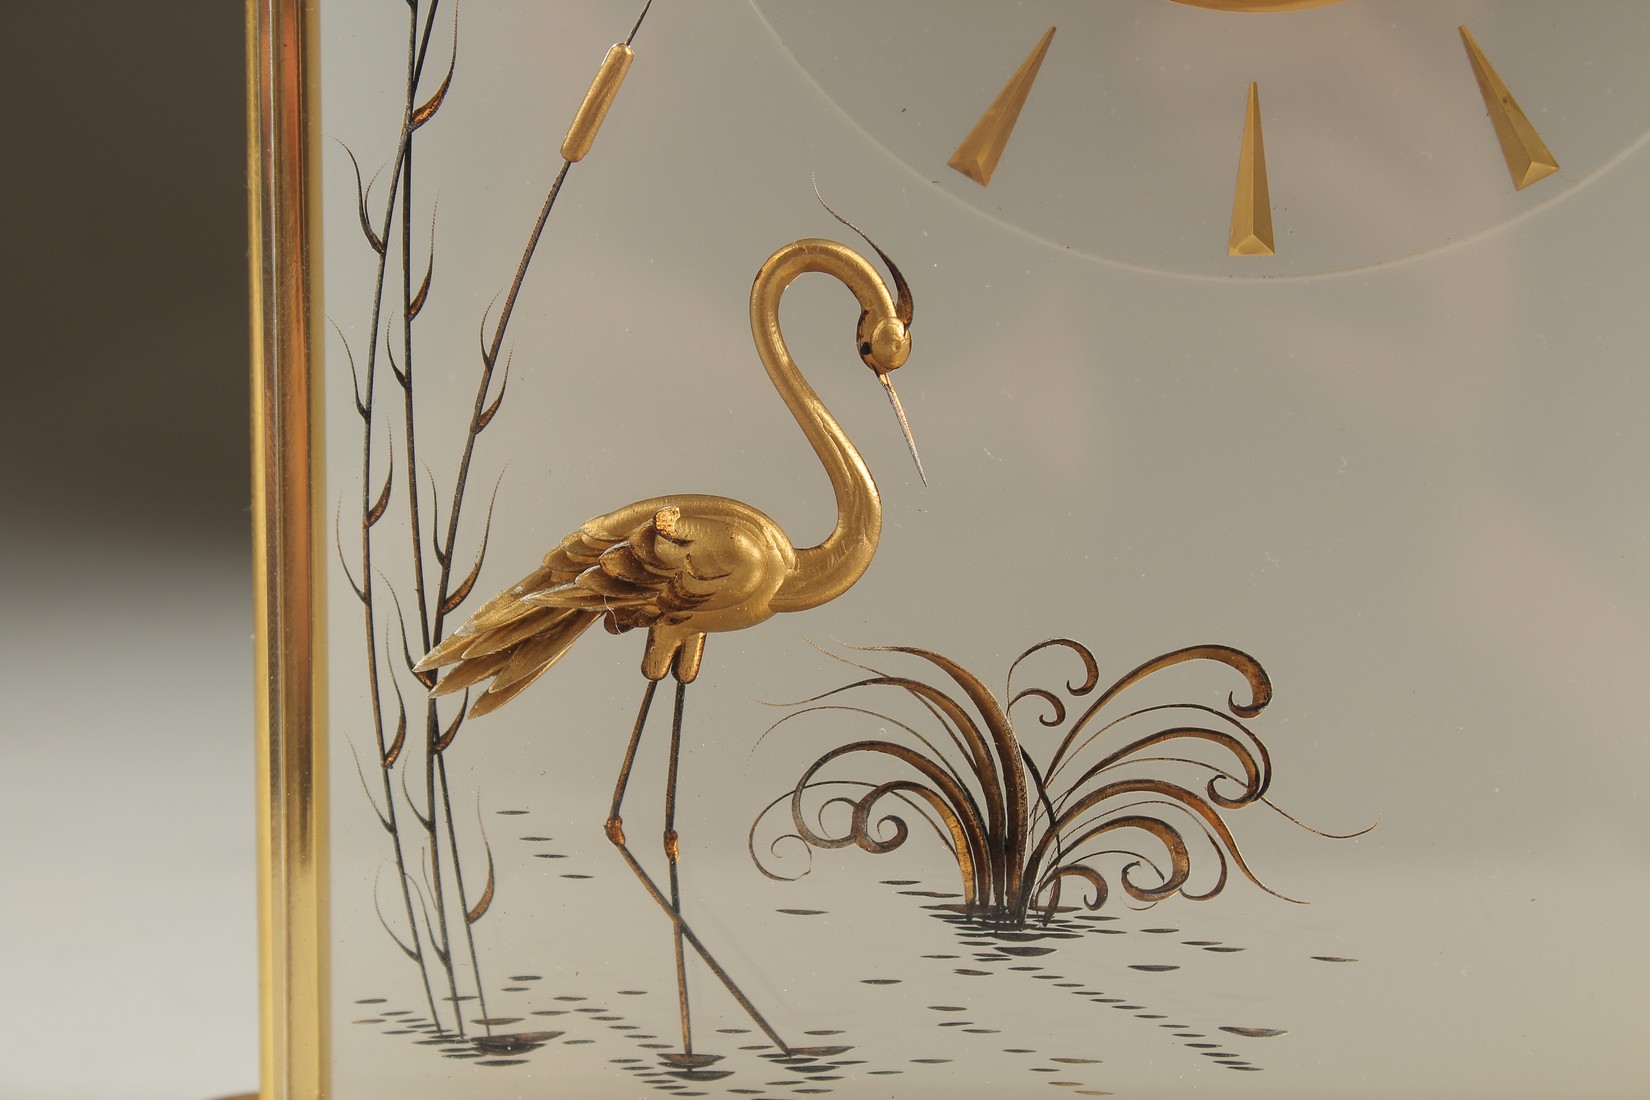 A VERY GOOD JAEGER LECOULTRE CLOCK with a stork and bullrushes. No. 467. 8cms high x 6ins wide - Image 3 of 5